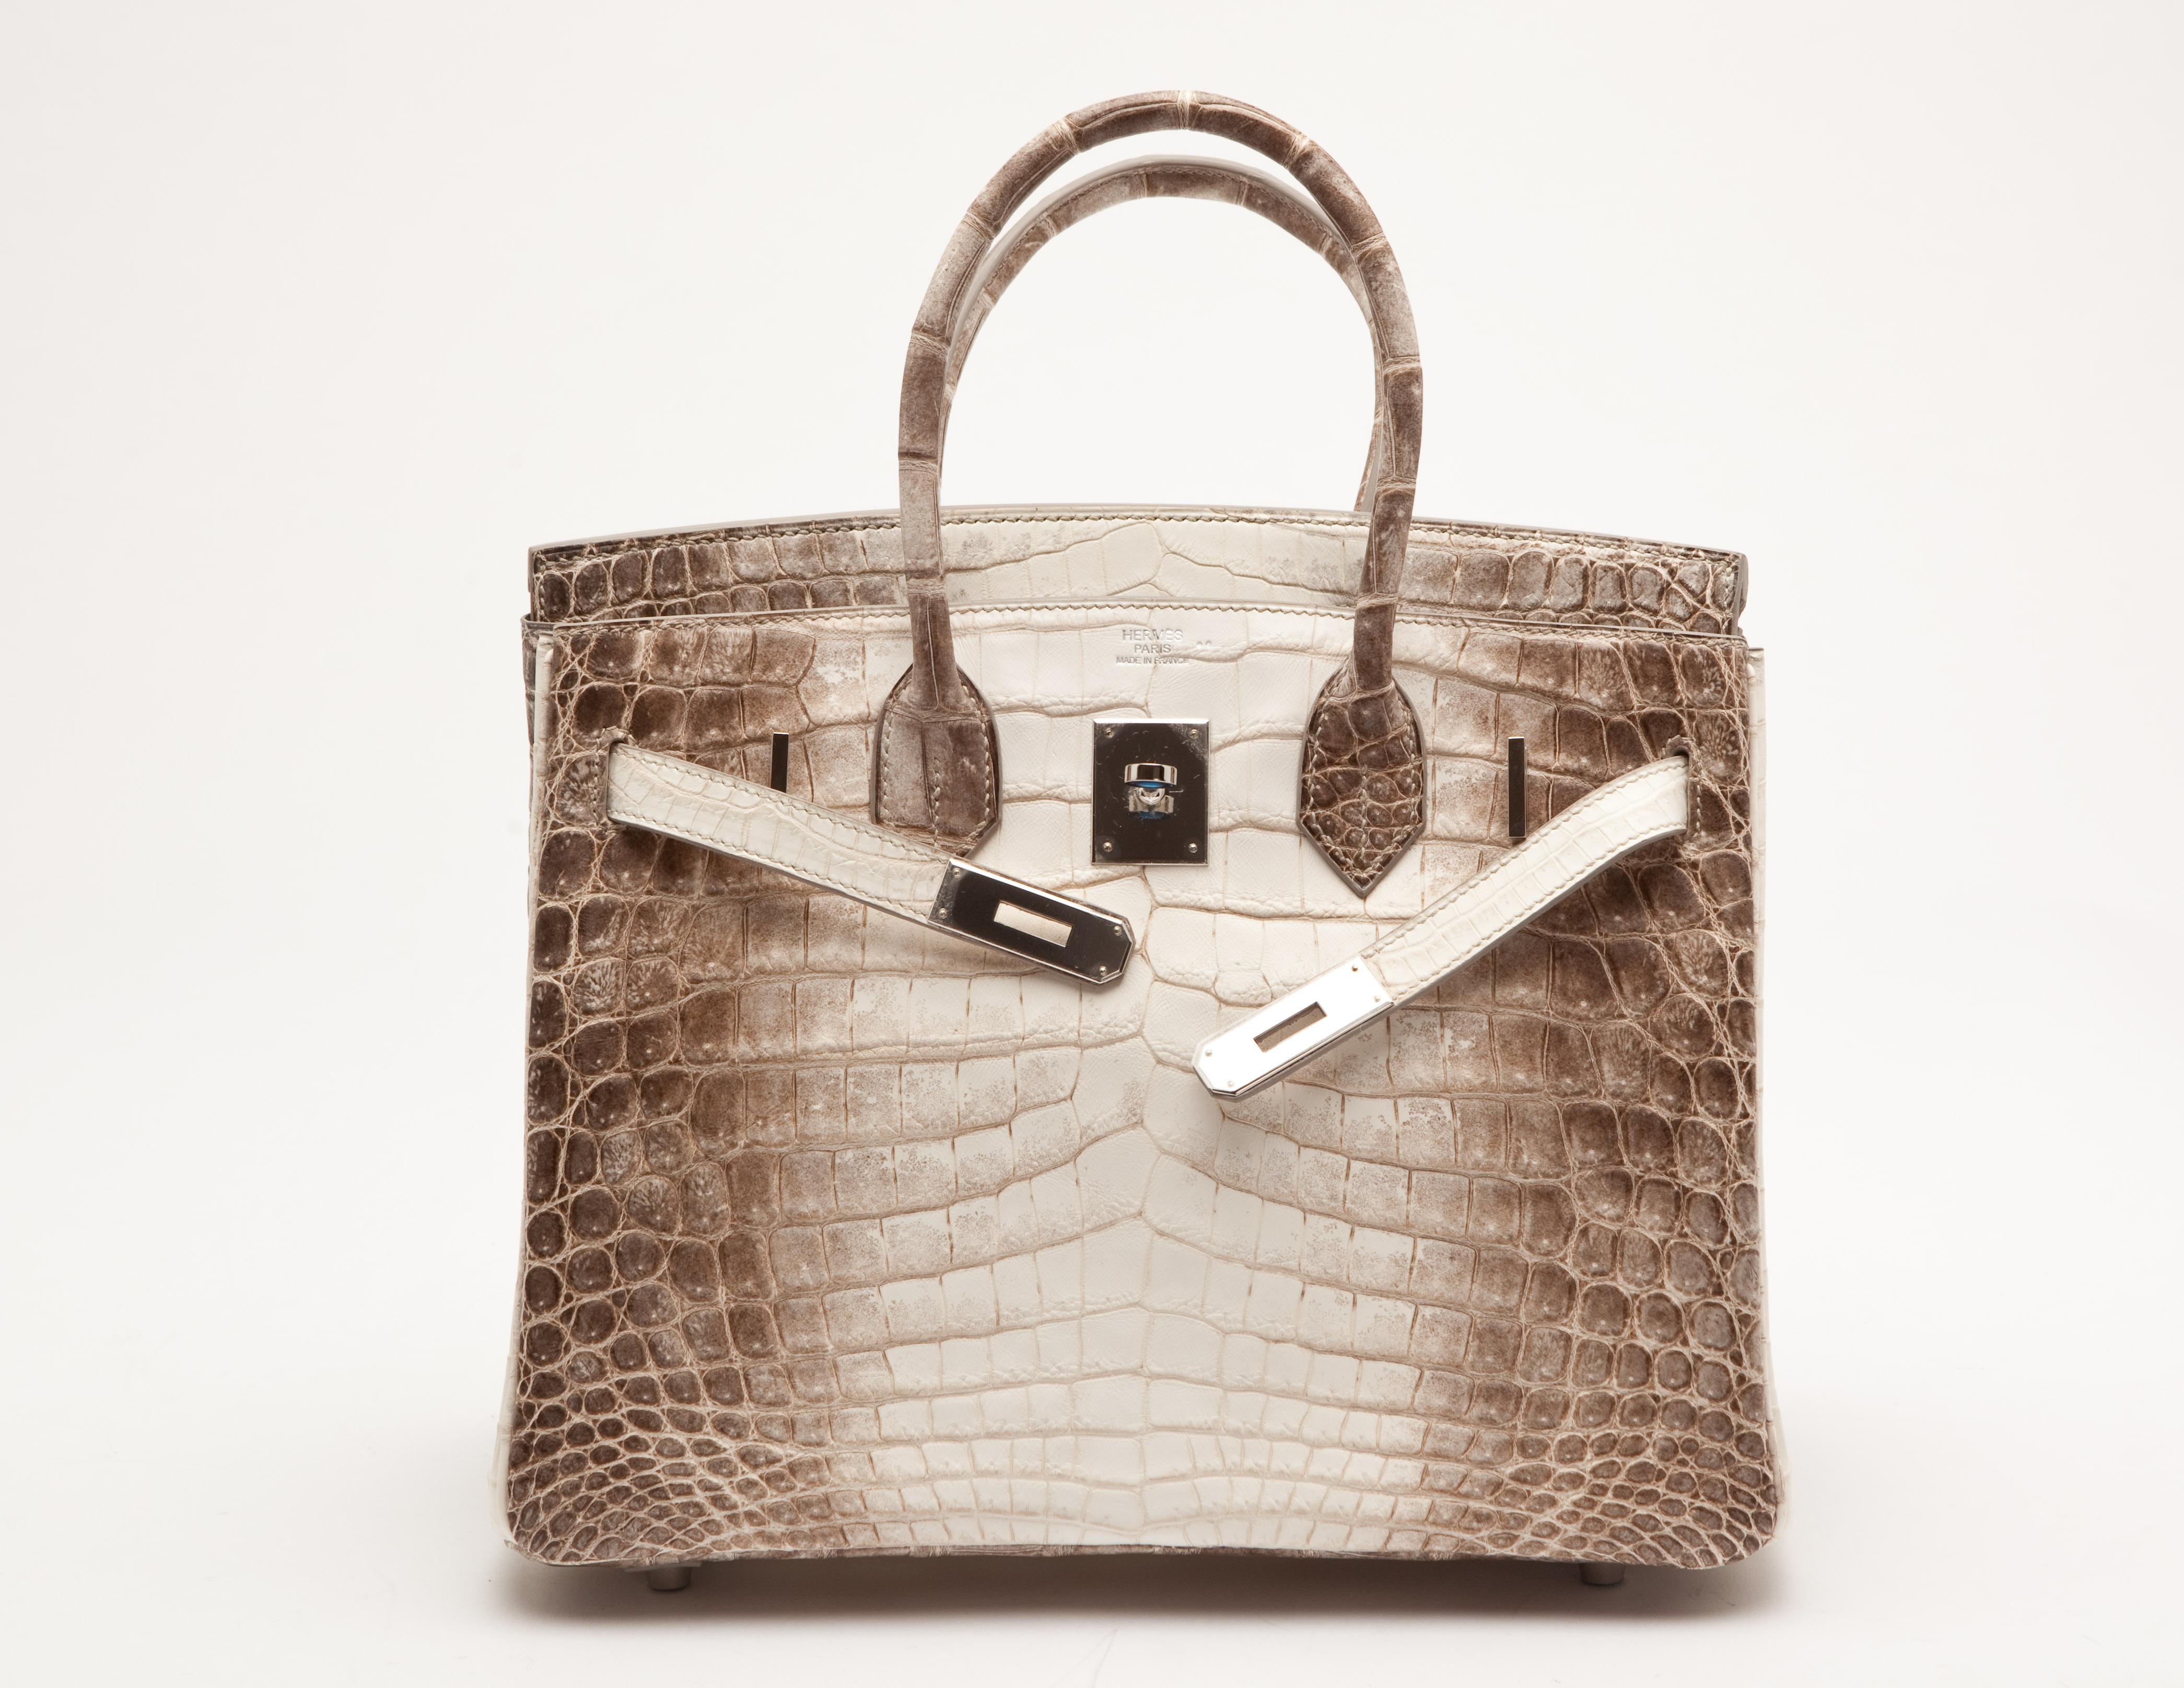 Hermes Birkin 30cm in classic hiamalayan niloticus crocodile leather with palladium hardware.  A classic since its inception, it is one of the world's most coveted handbags. 

Packaged in its original packaging with all applicable CITES documents.

